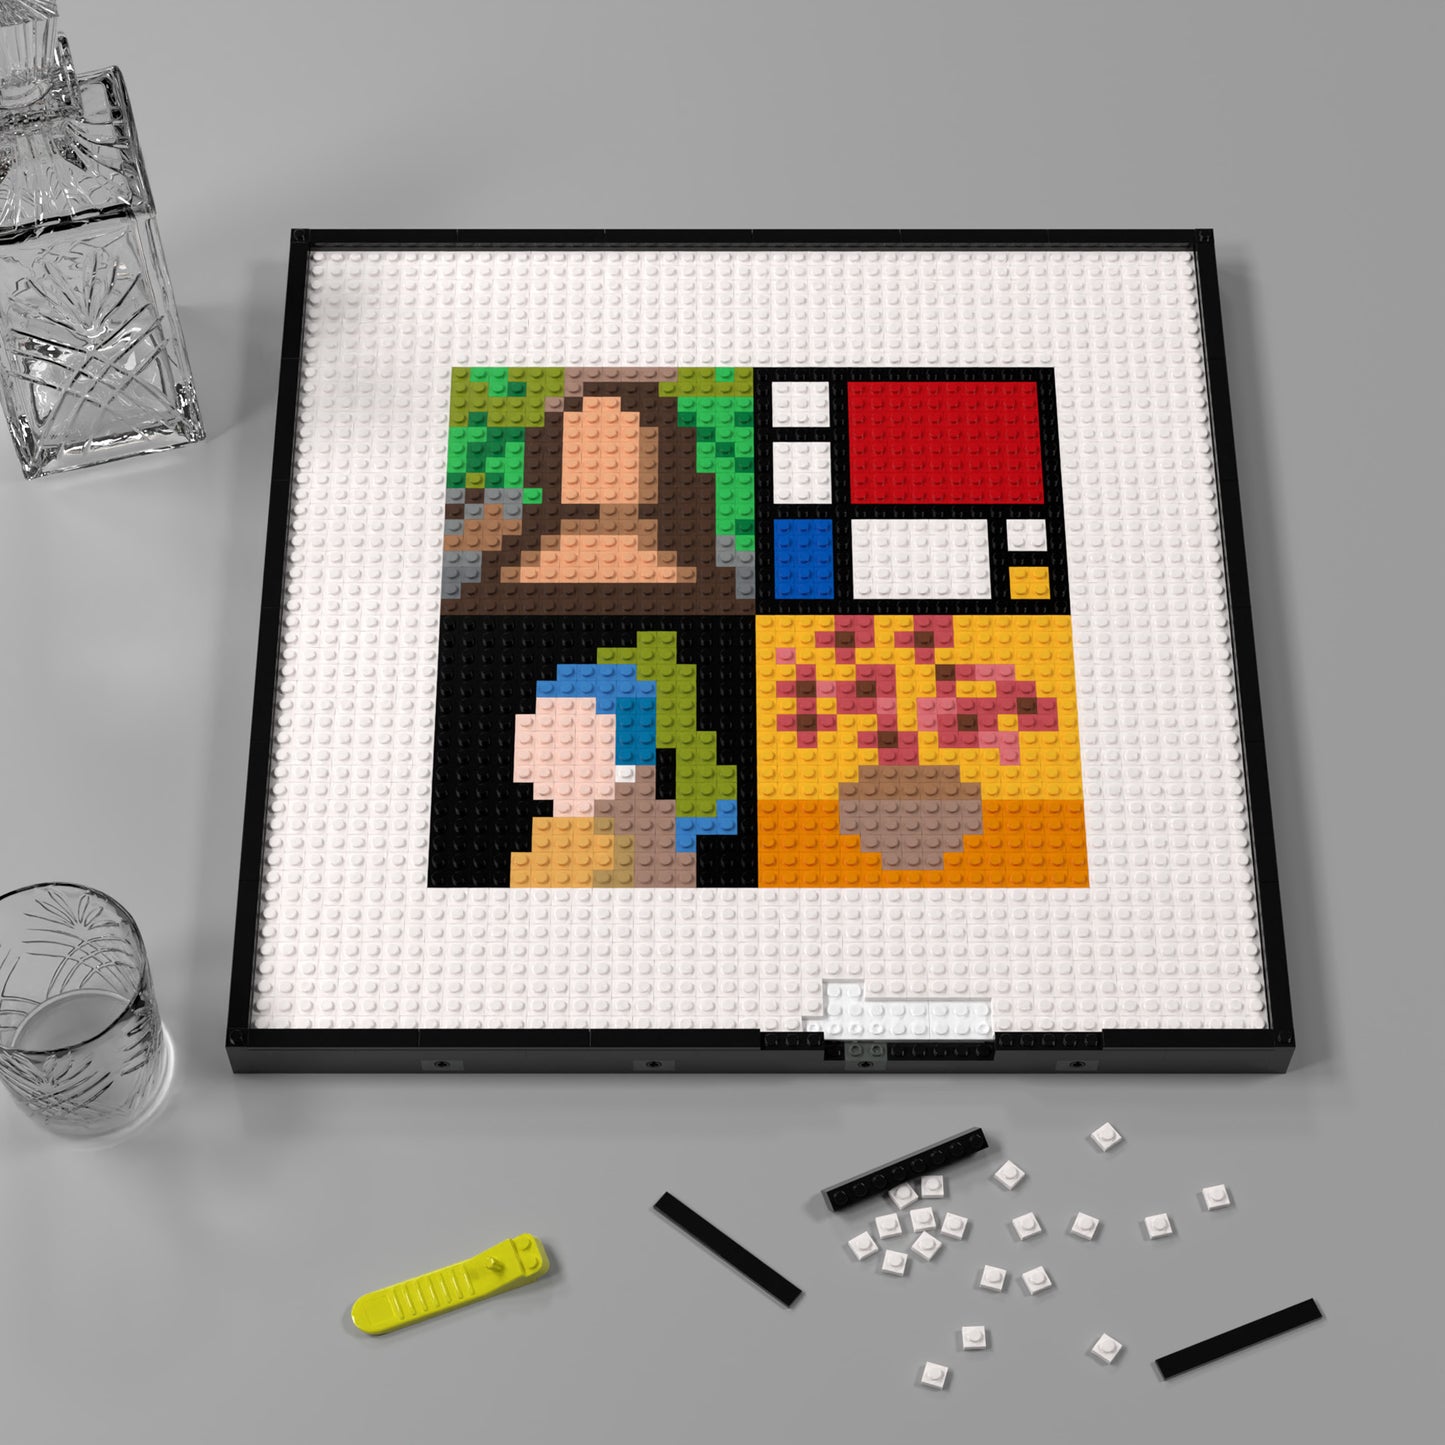 Four Famous Paintings Gathering! Mona Lisa's Smile・Van Gogh's Sunflowers・Girl with a Pearl Earring・Mondrian, Lego Compatible Pixel Art Jigsaw Puzzle